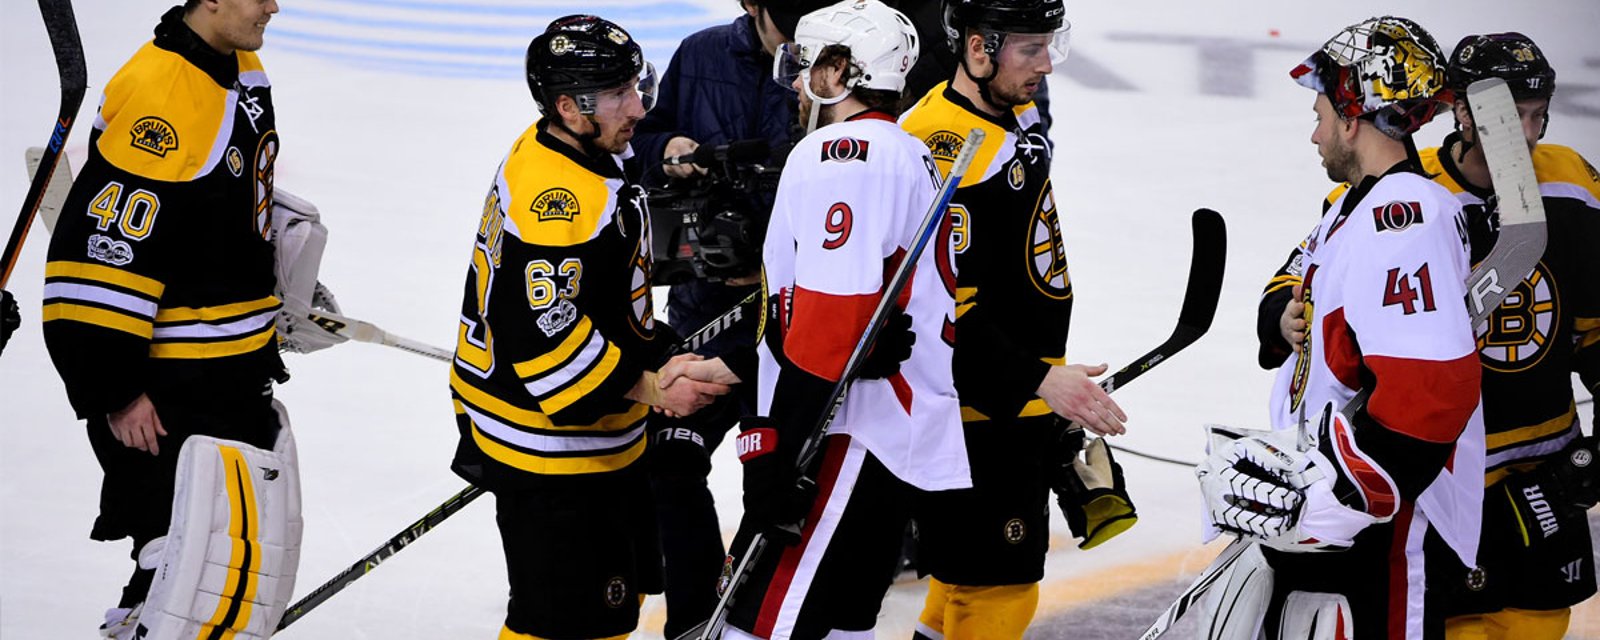 Your call: Boston Bruins: better or worse? 